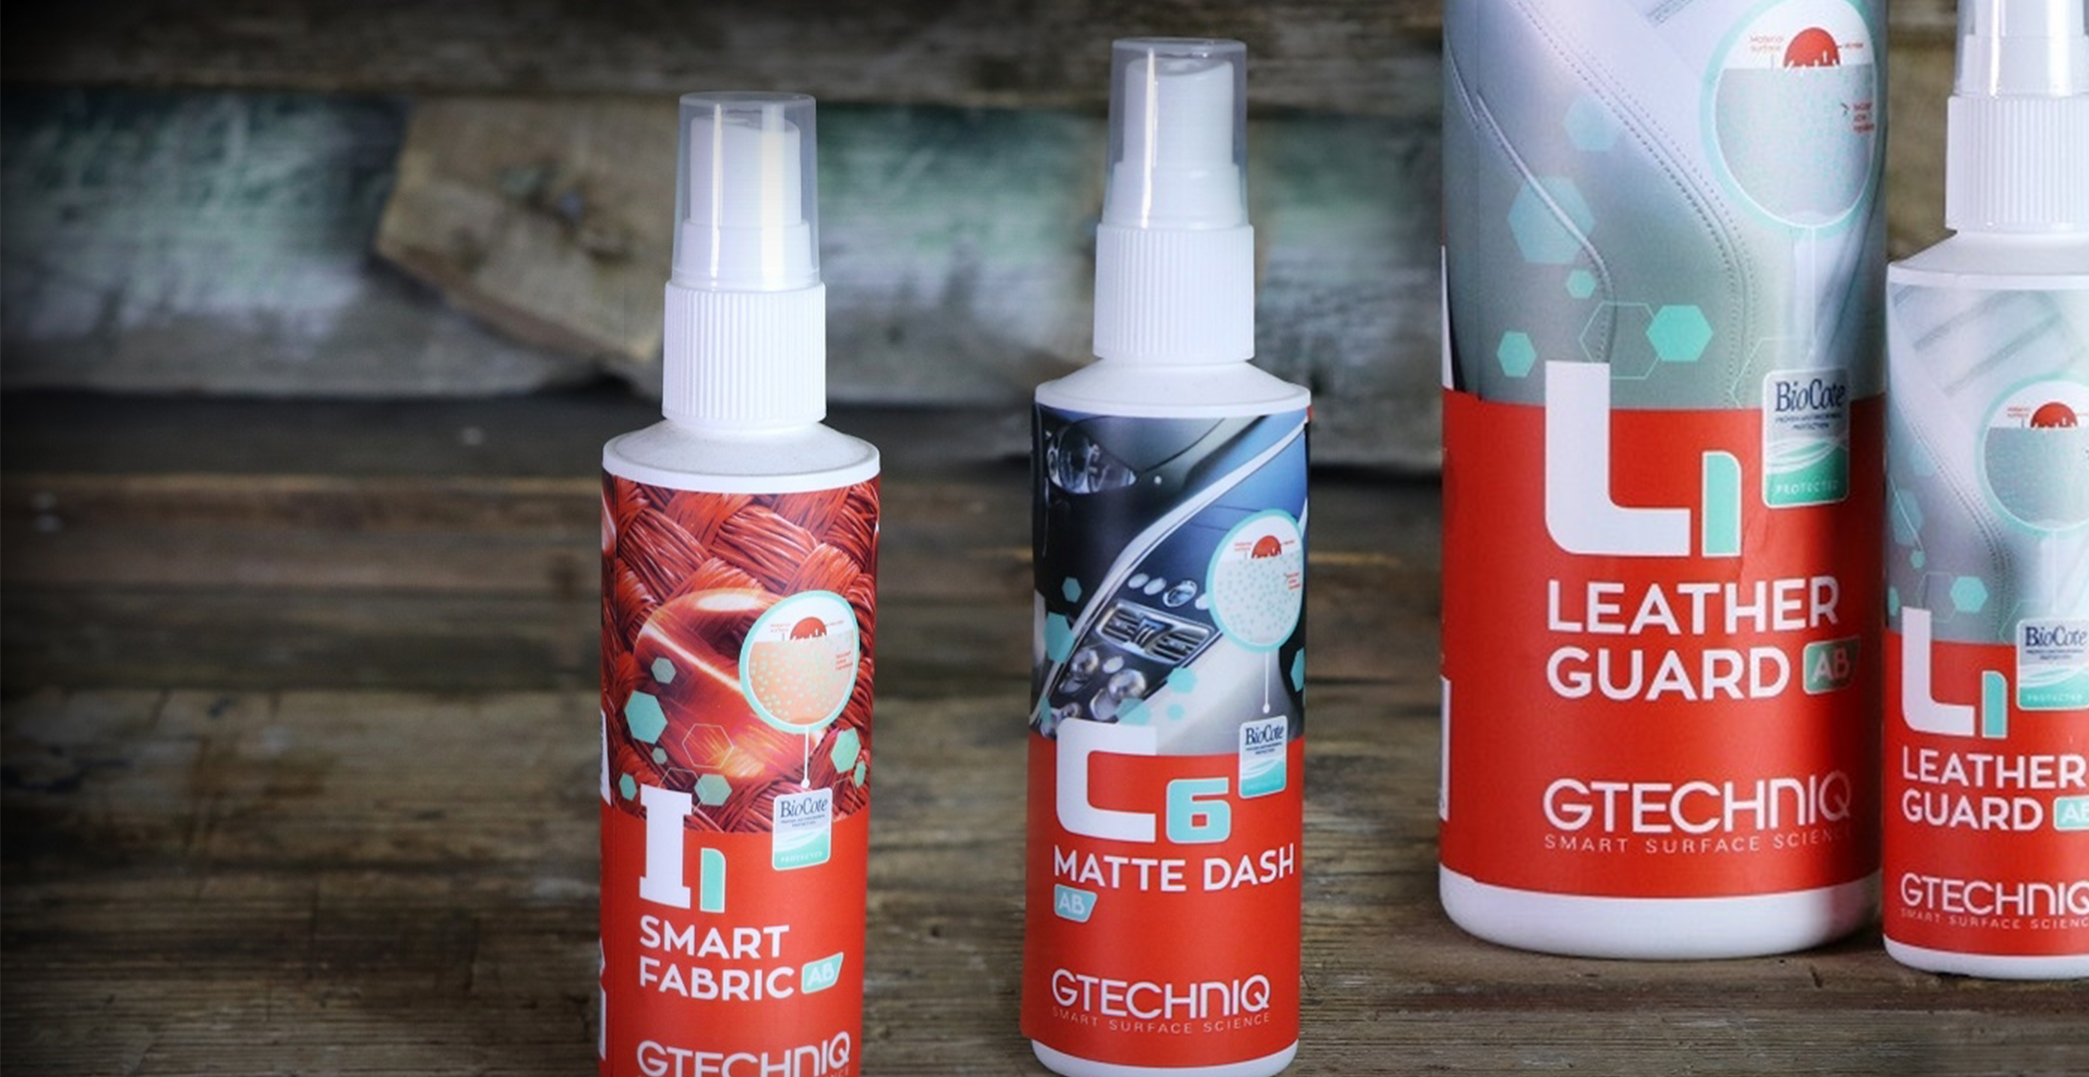 Gtechniq introduces antibacterial protection making cars a safer place to be